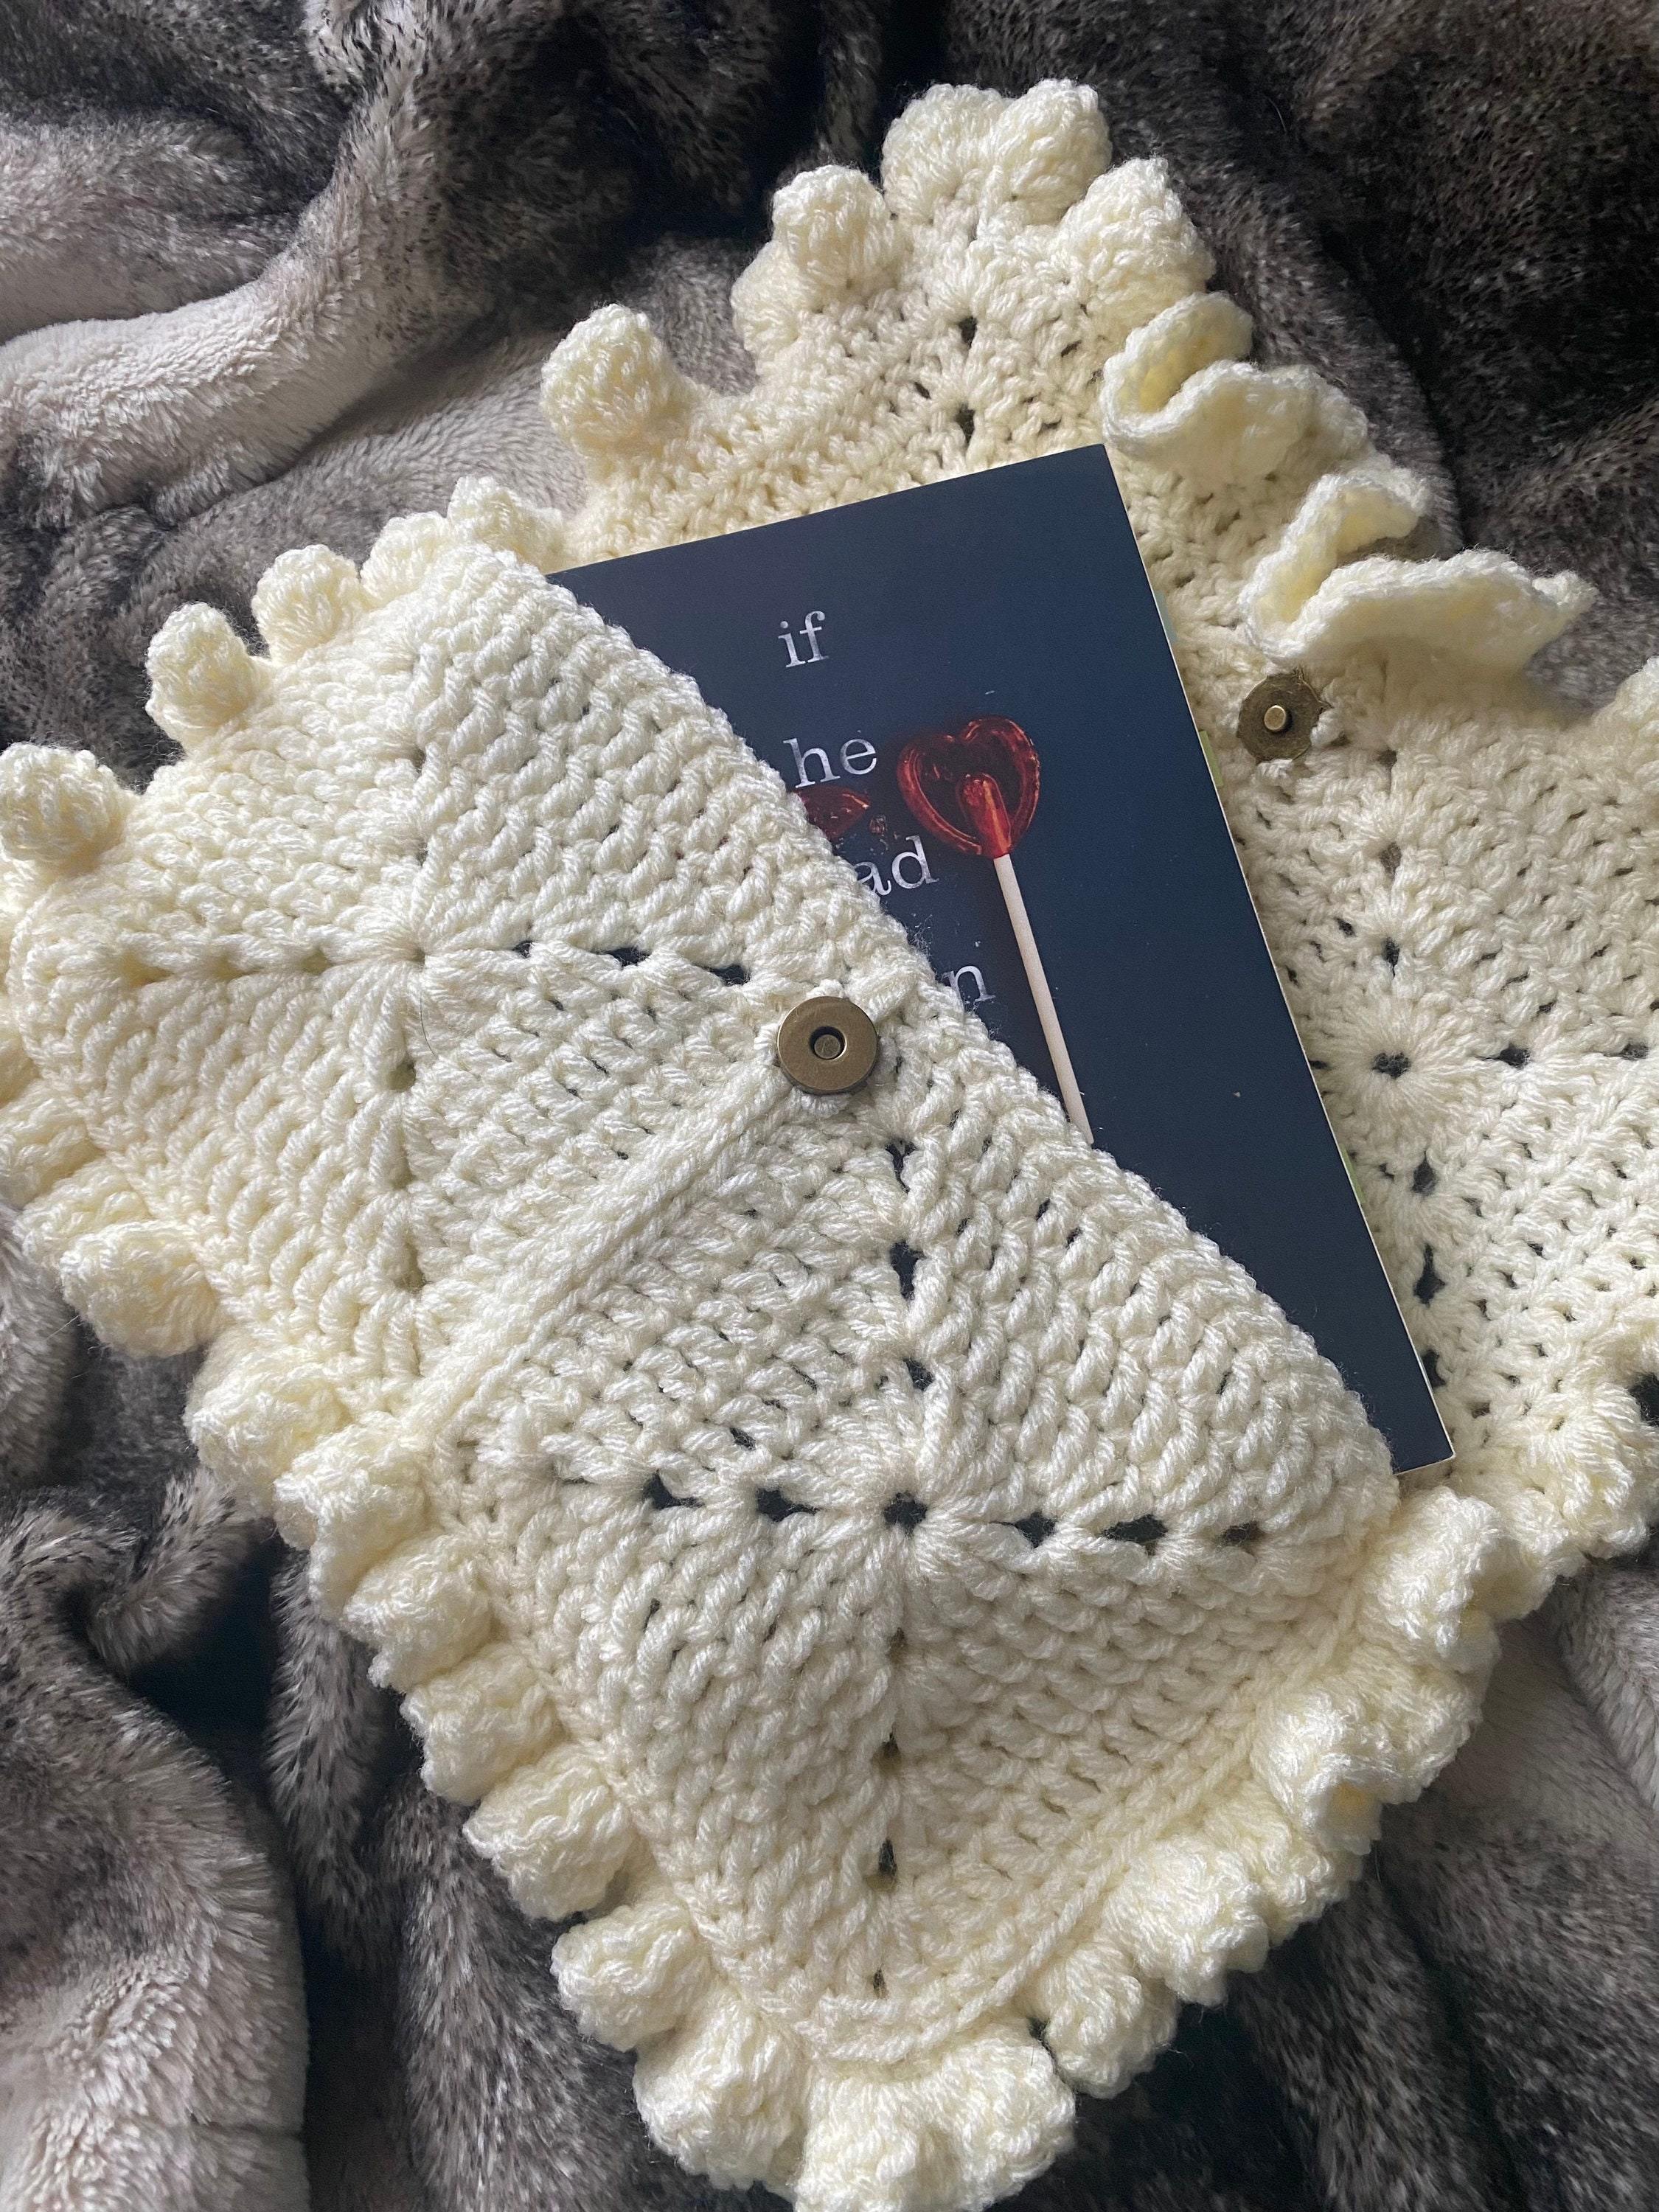 Crochet Granny Square Full Book Cover With Magnetic Button -  Norway